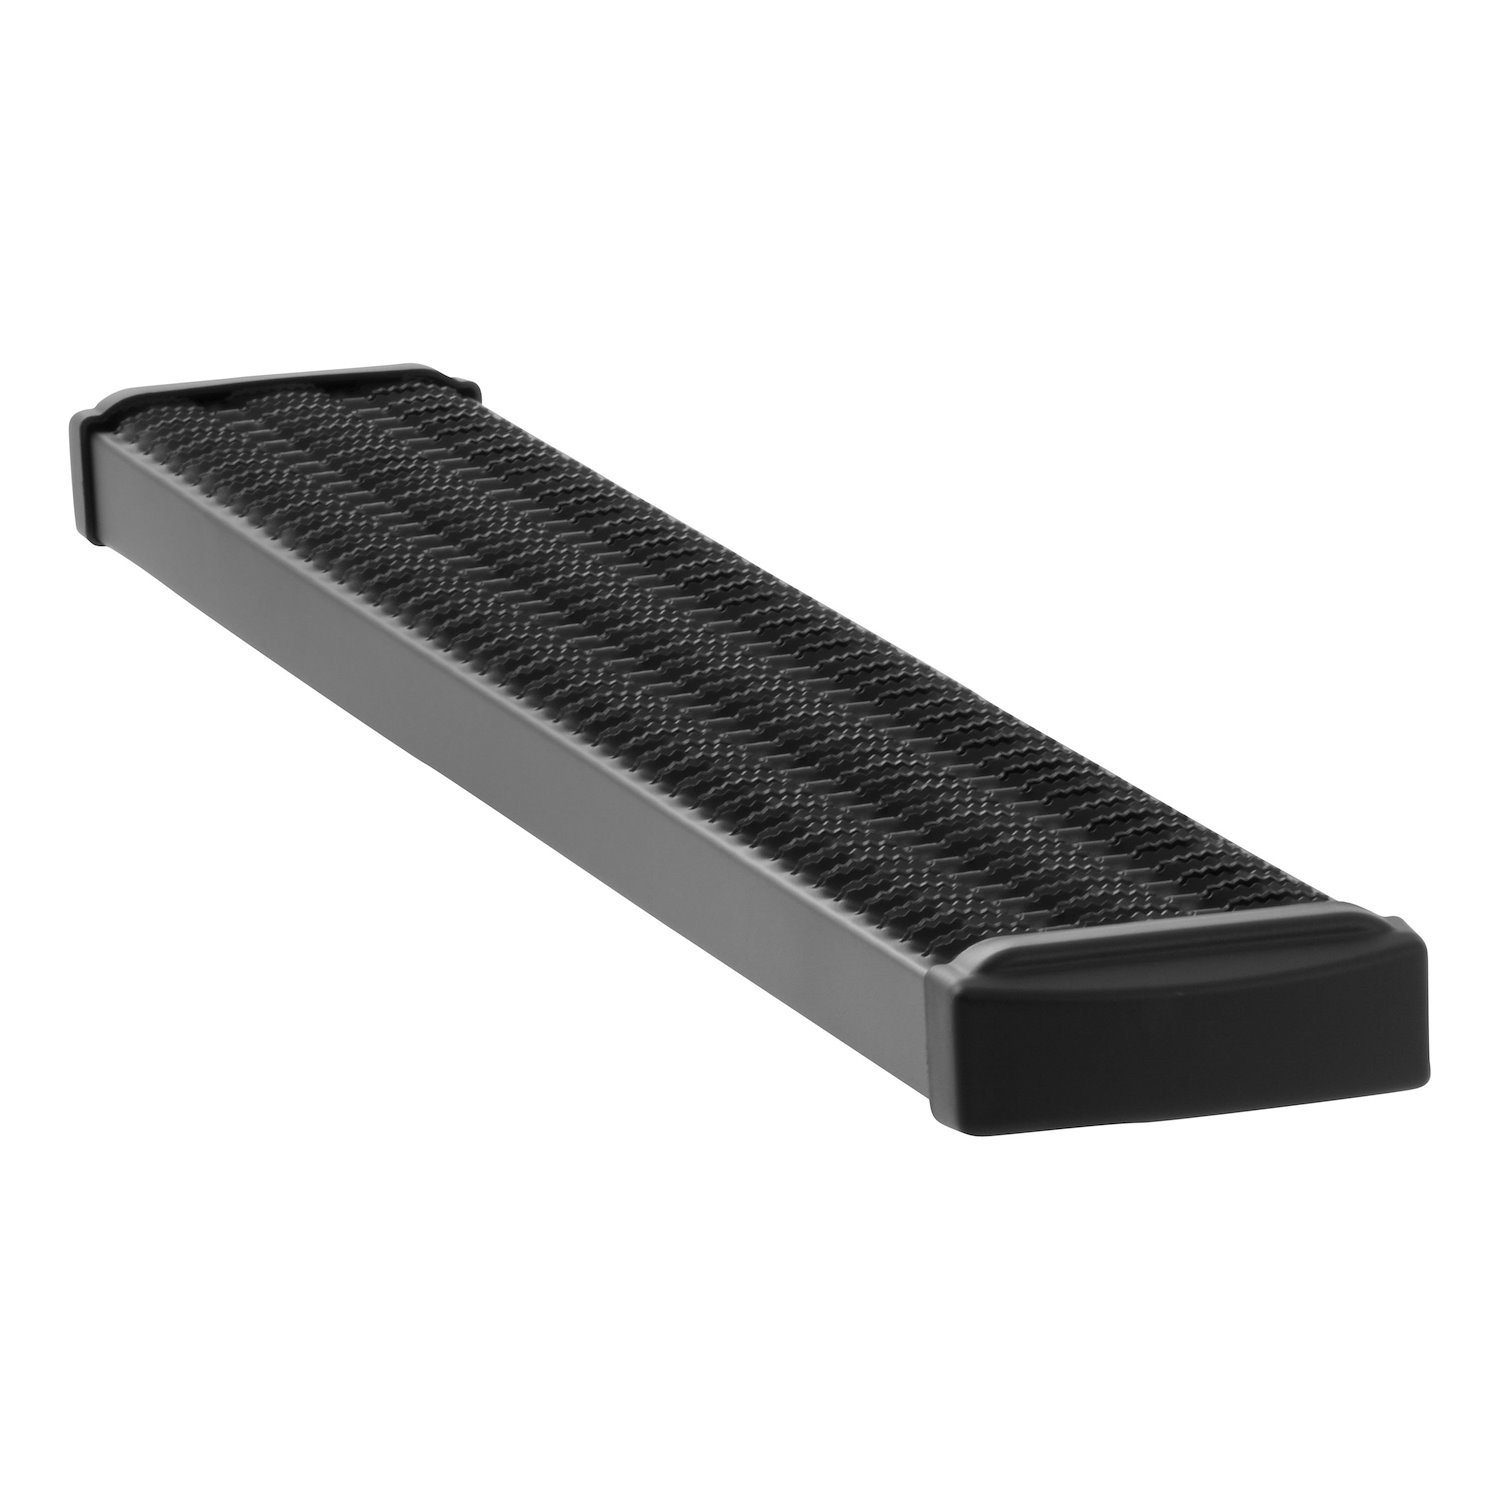 415254 Grip Step 7 in. x 54 in. Black Aluminum Cargo Van Rear Step, Without Brackets